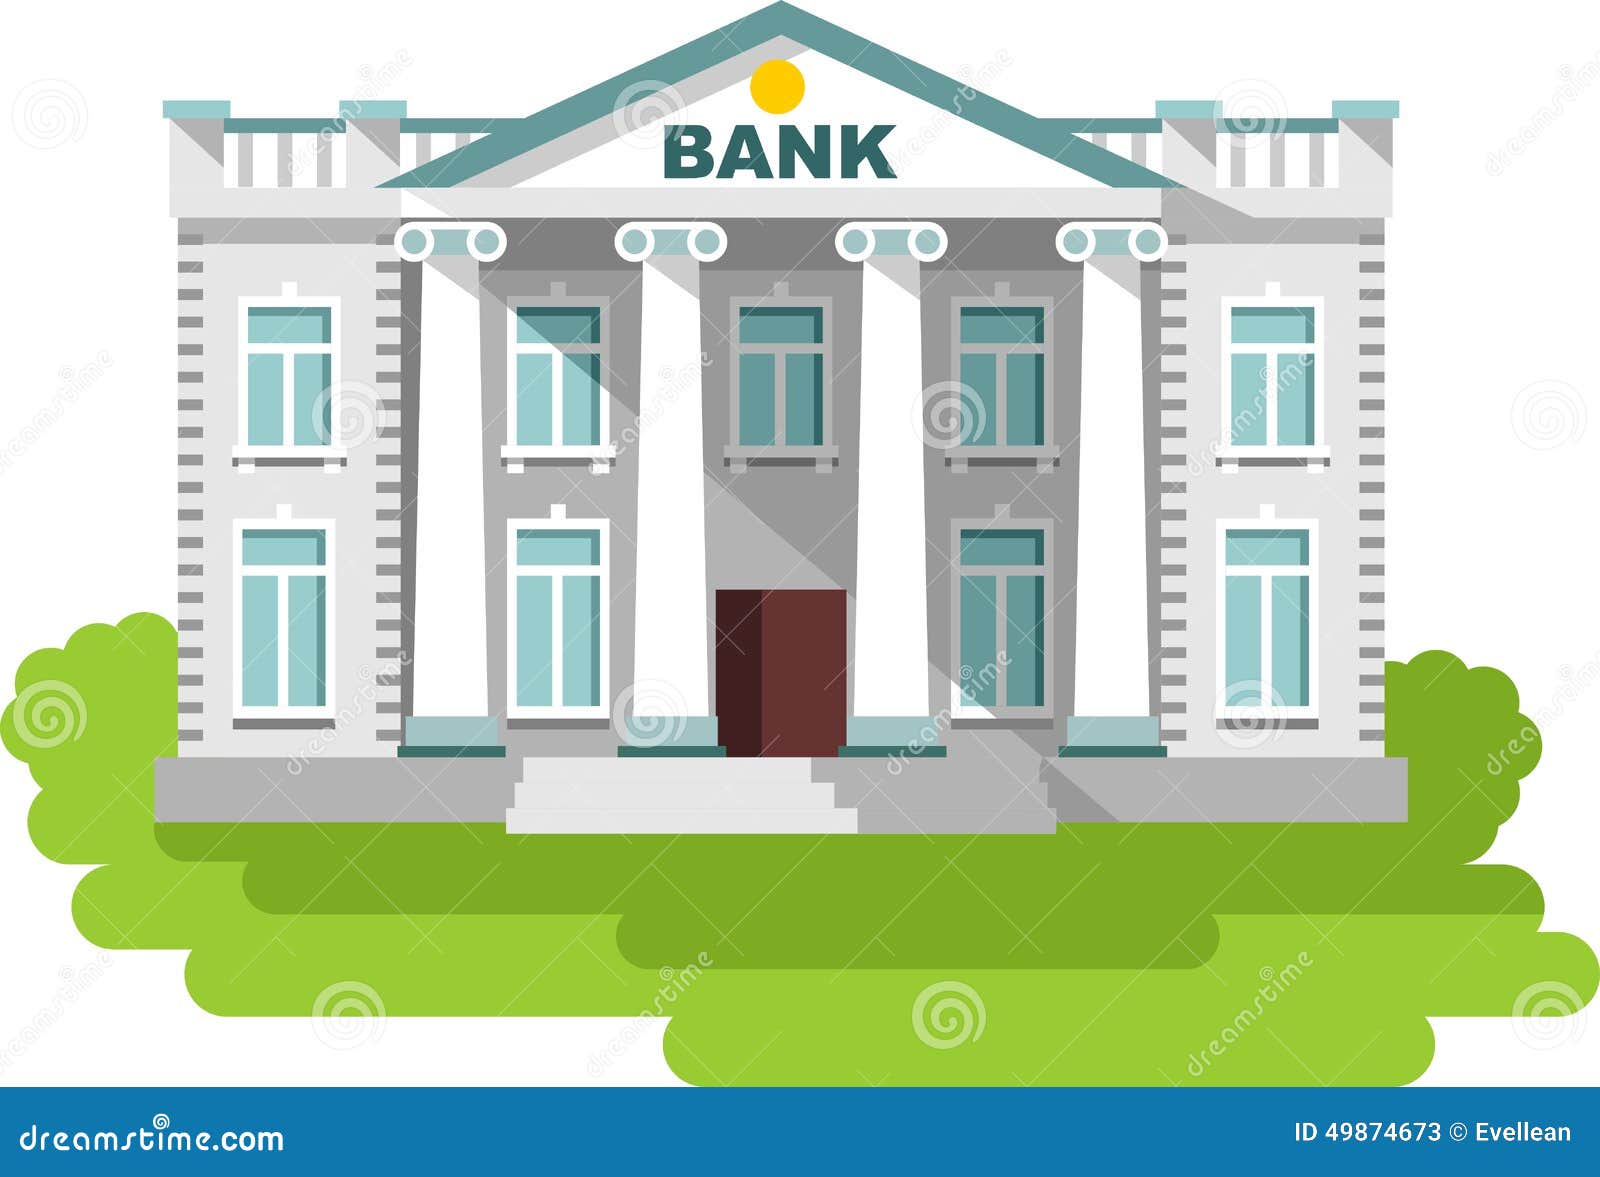 bank building in flat style